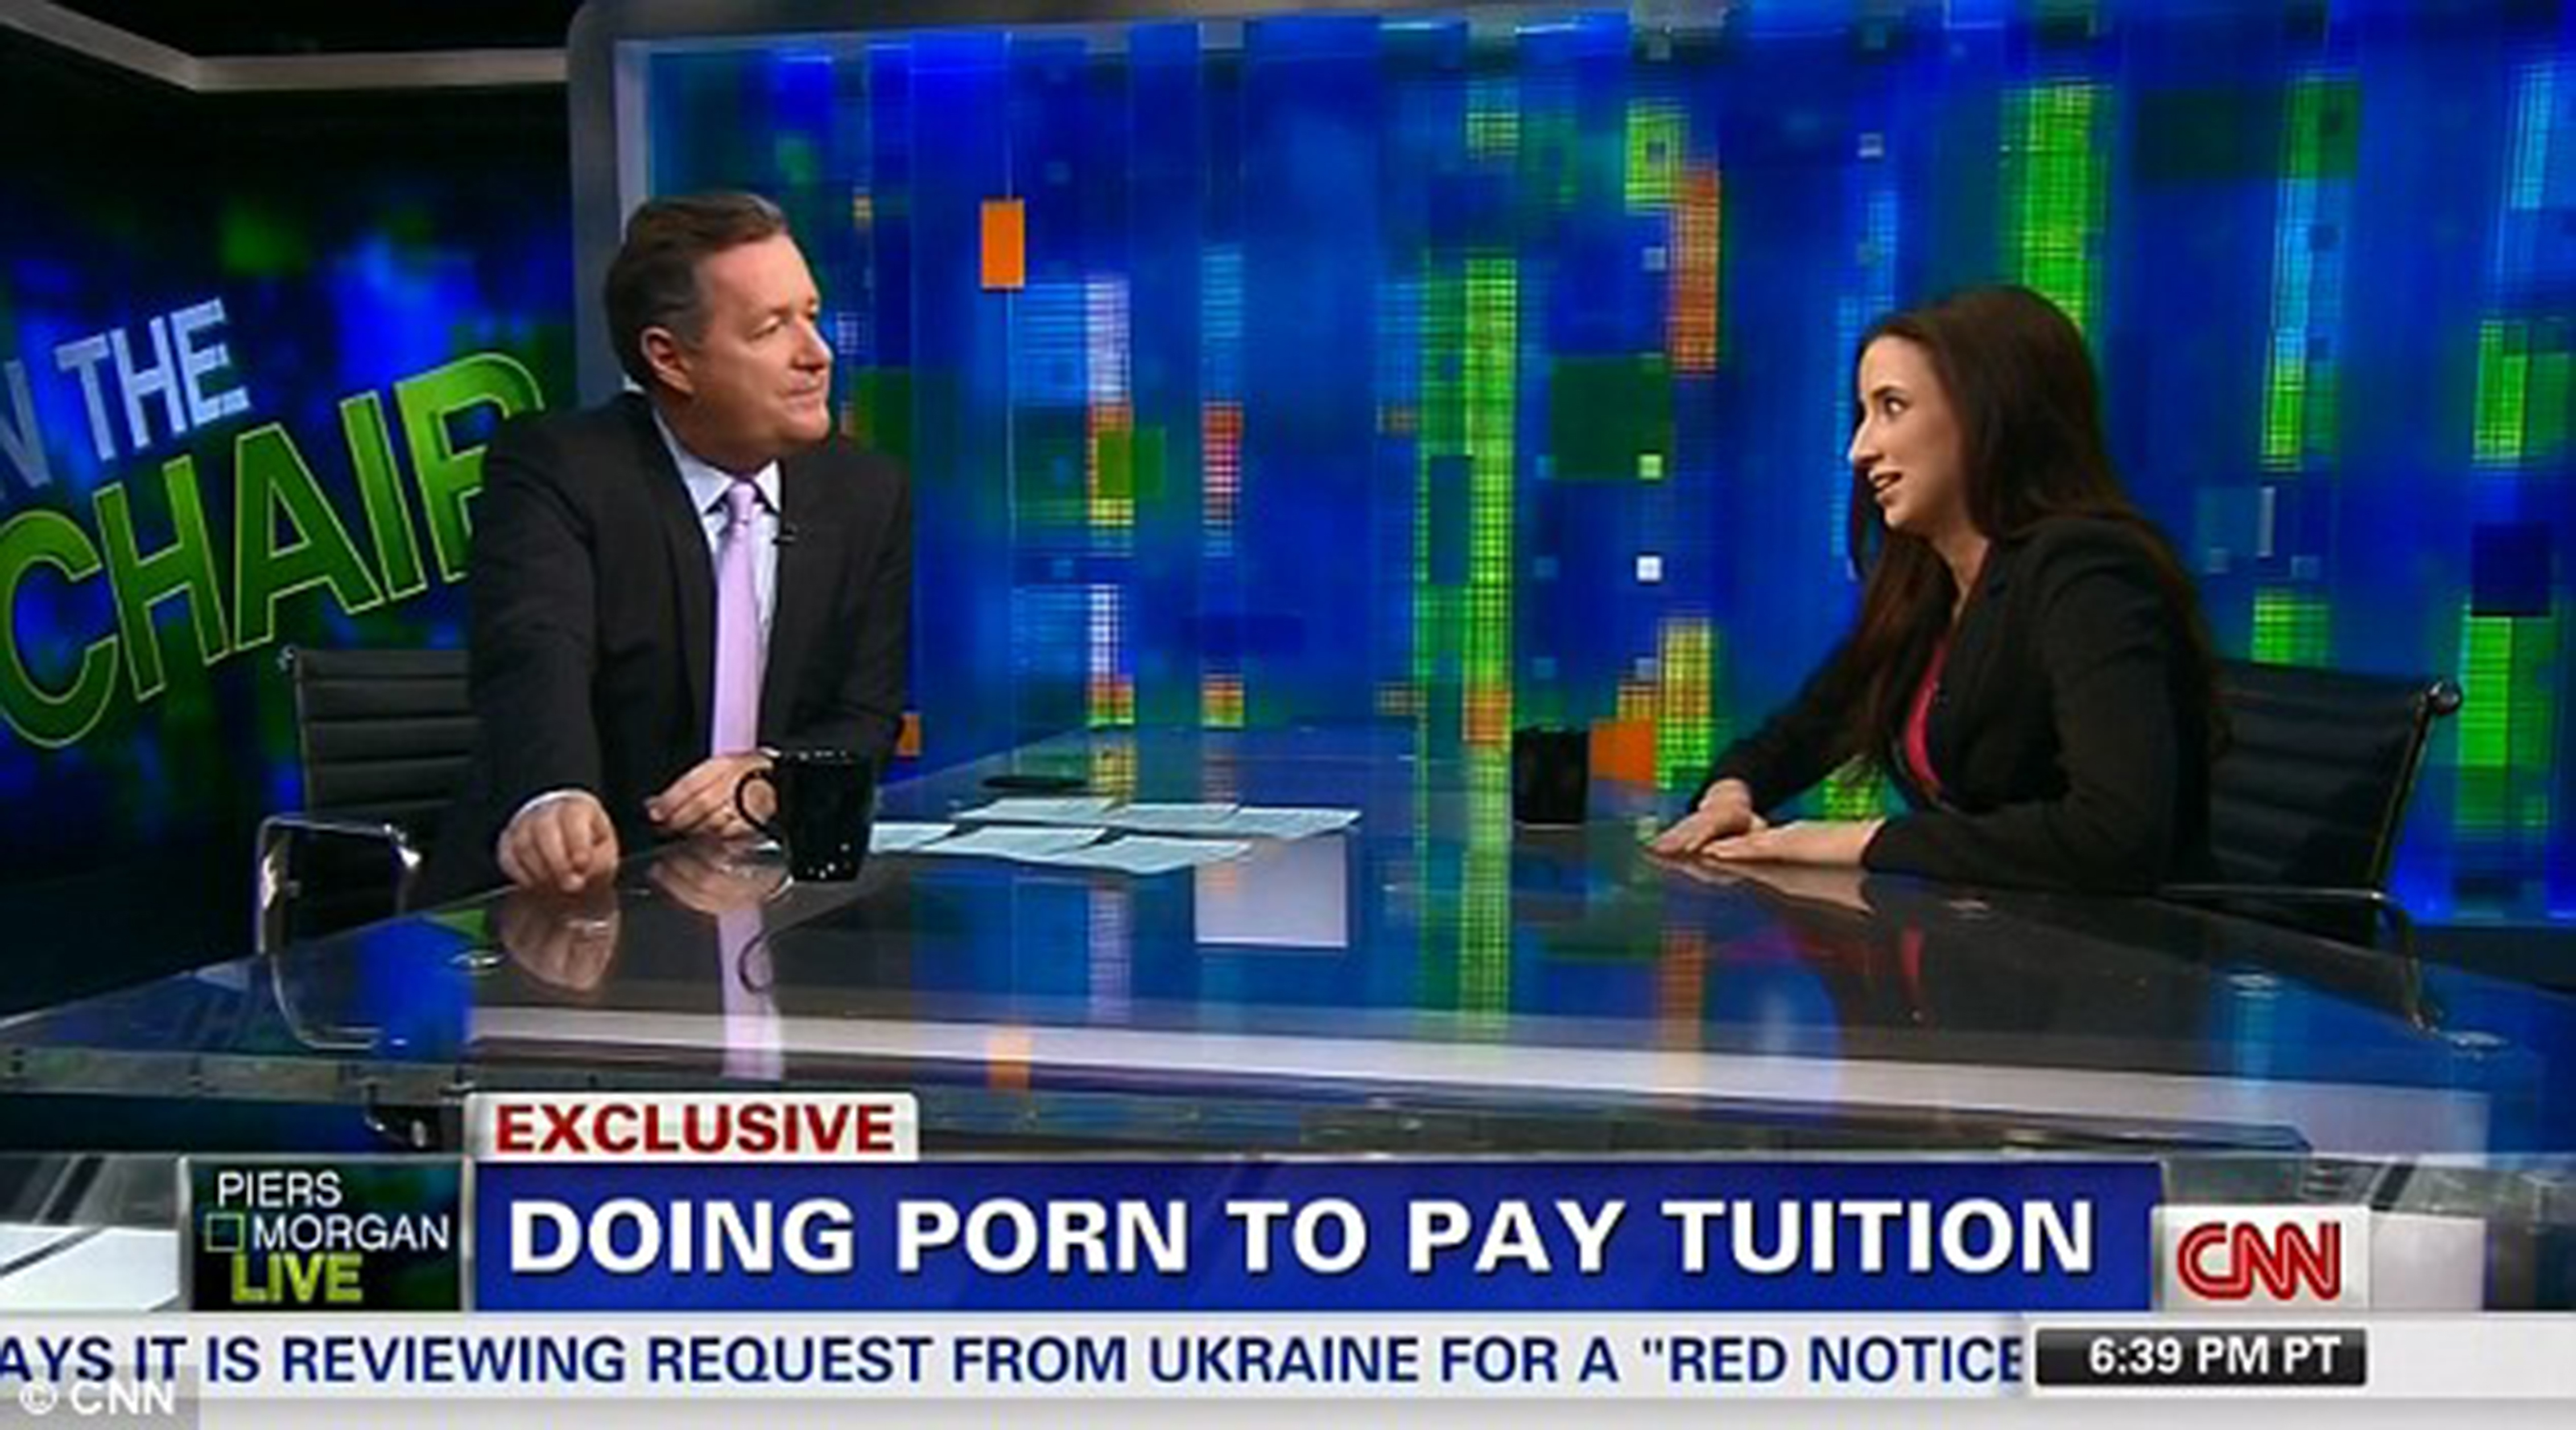 darren patton recommends porn to pay tuition pic